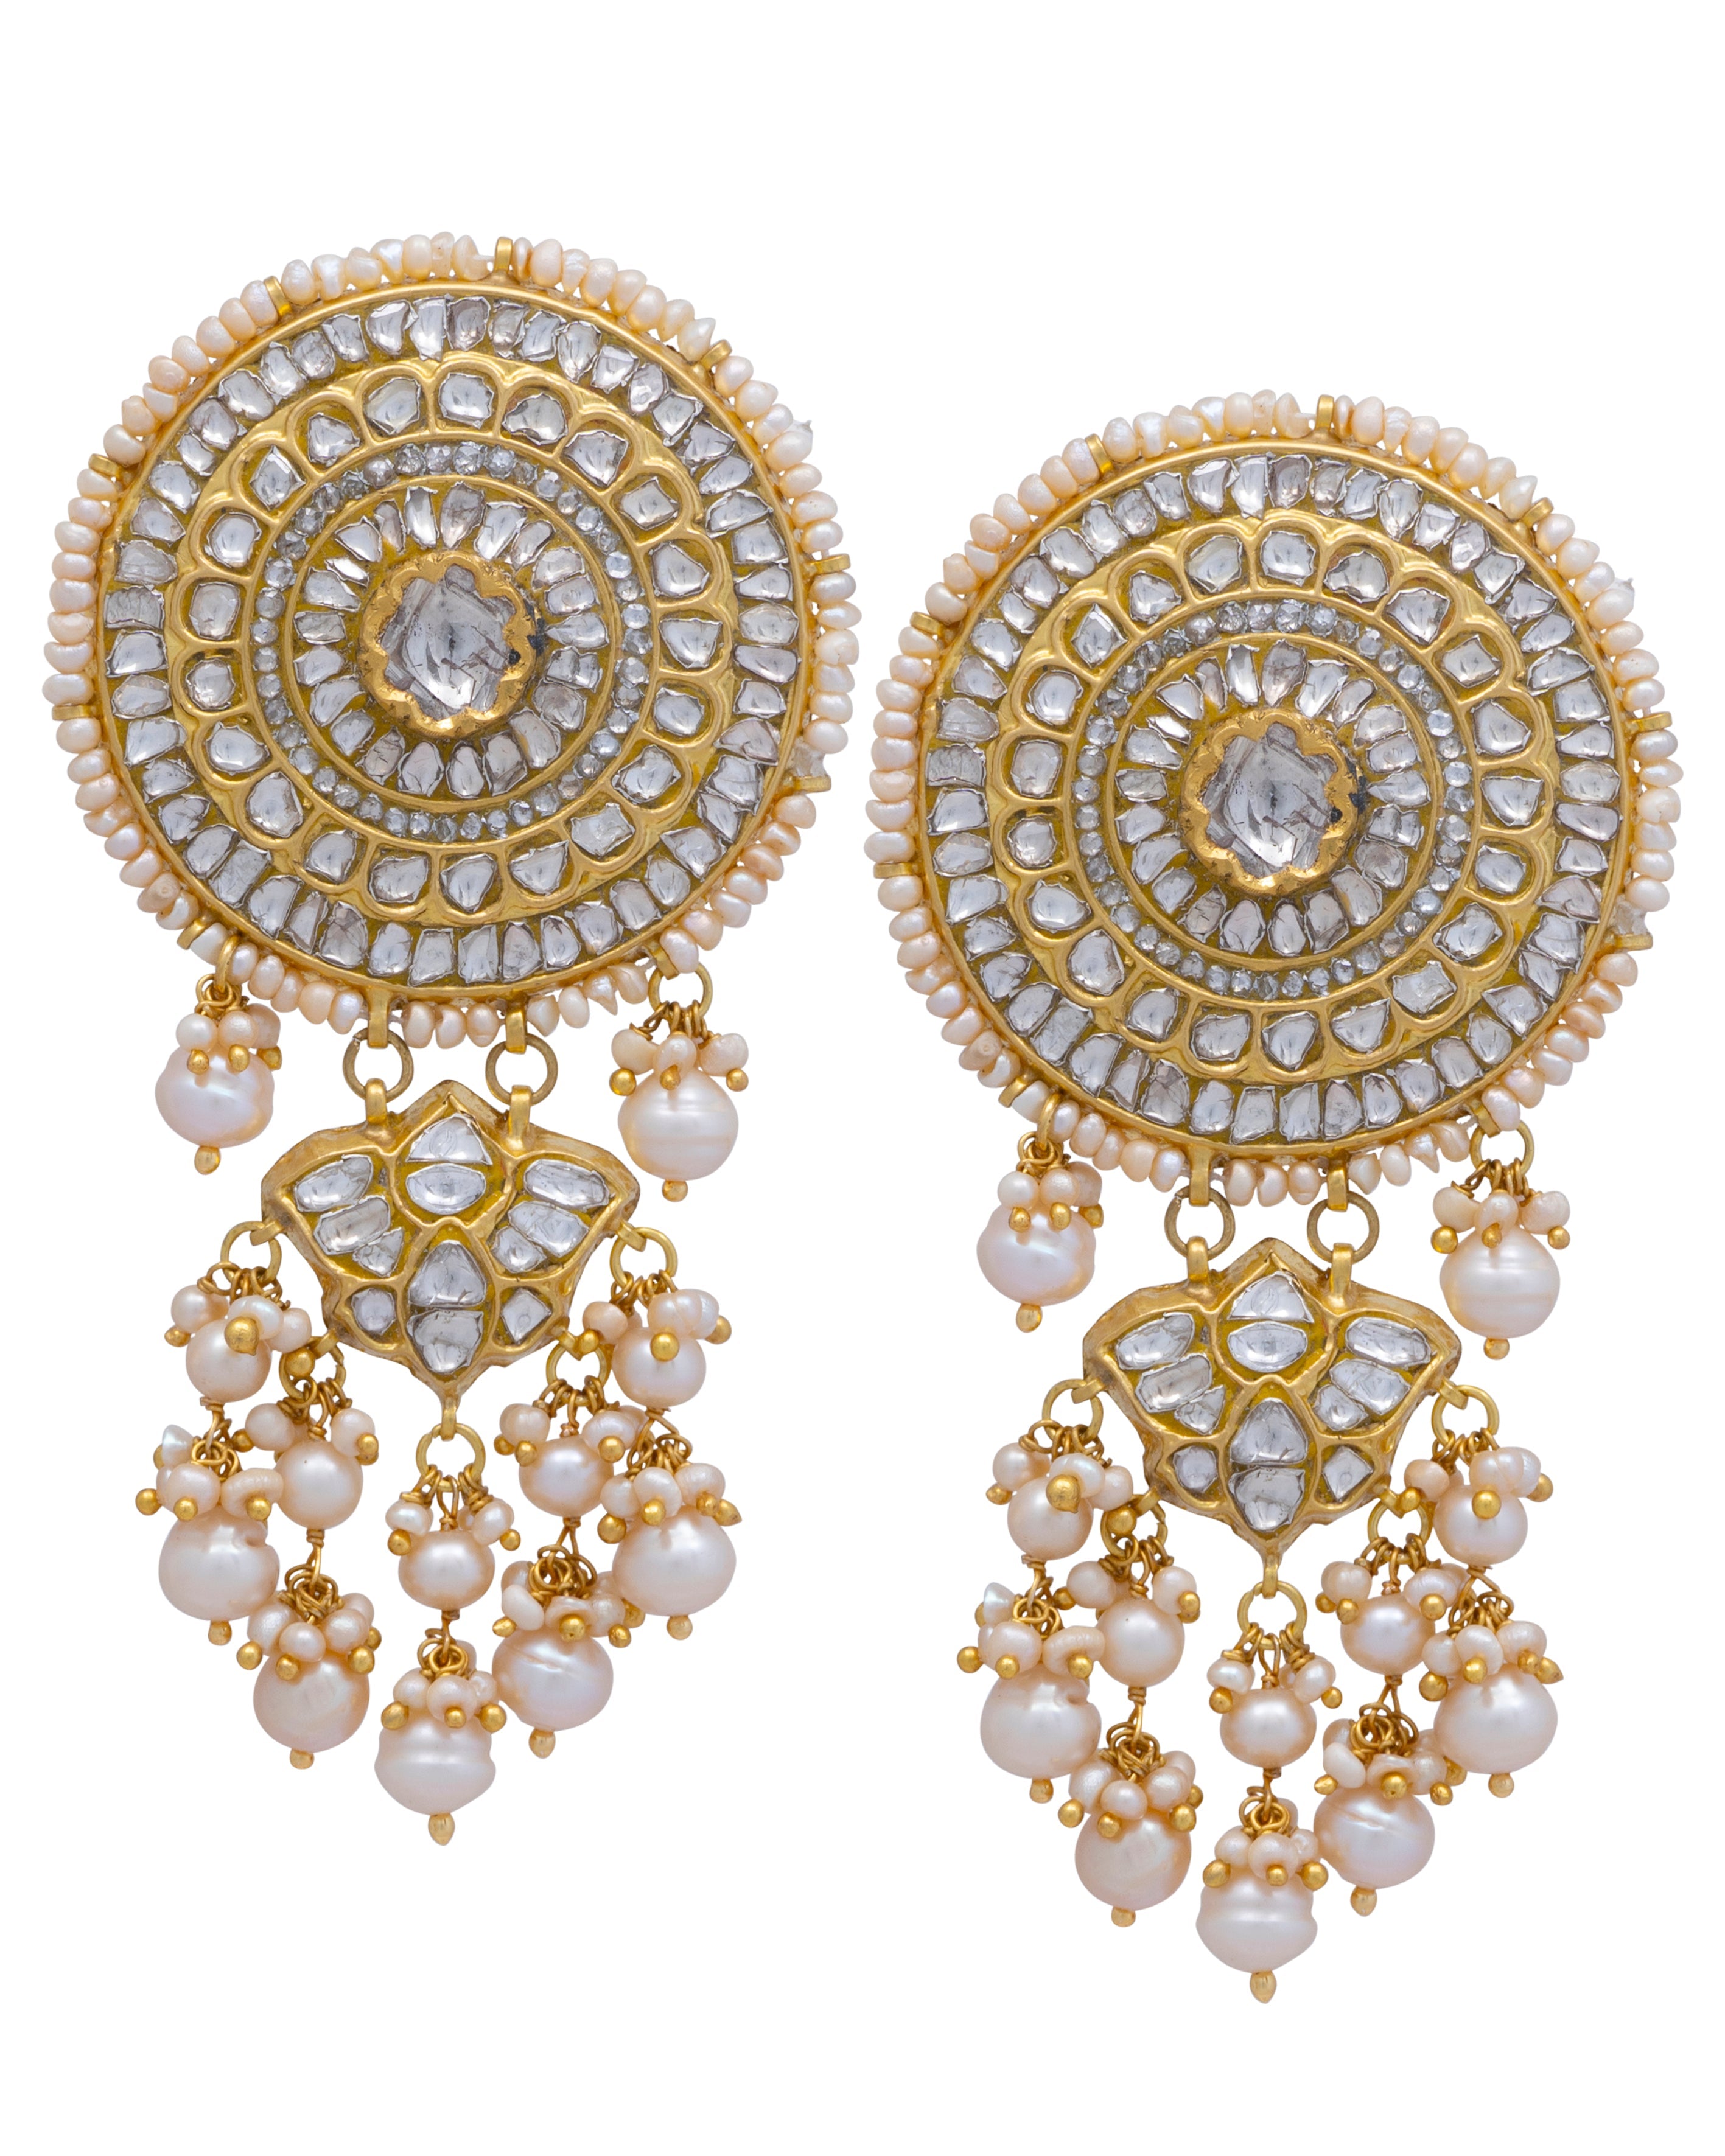 Soffio Long Earrings – Marissa Collections